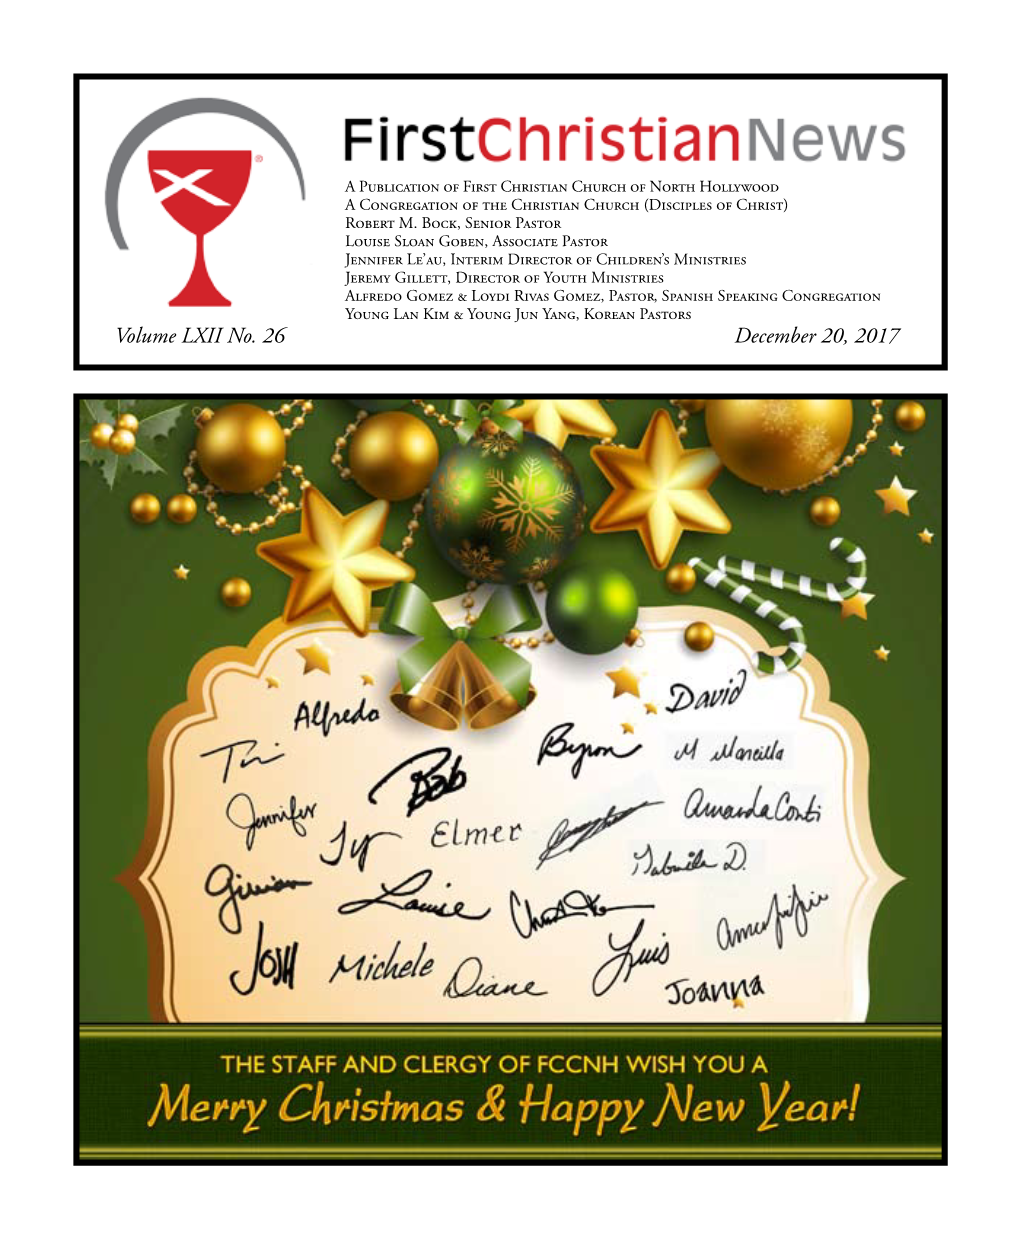 Volume LXII No. 26 December 20, 2017 Page  December 20, 2017 First Christian News